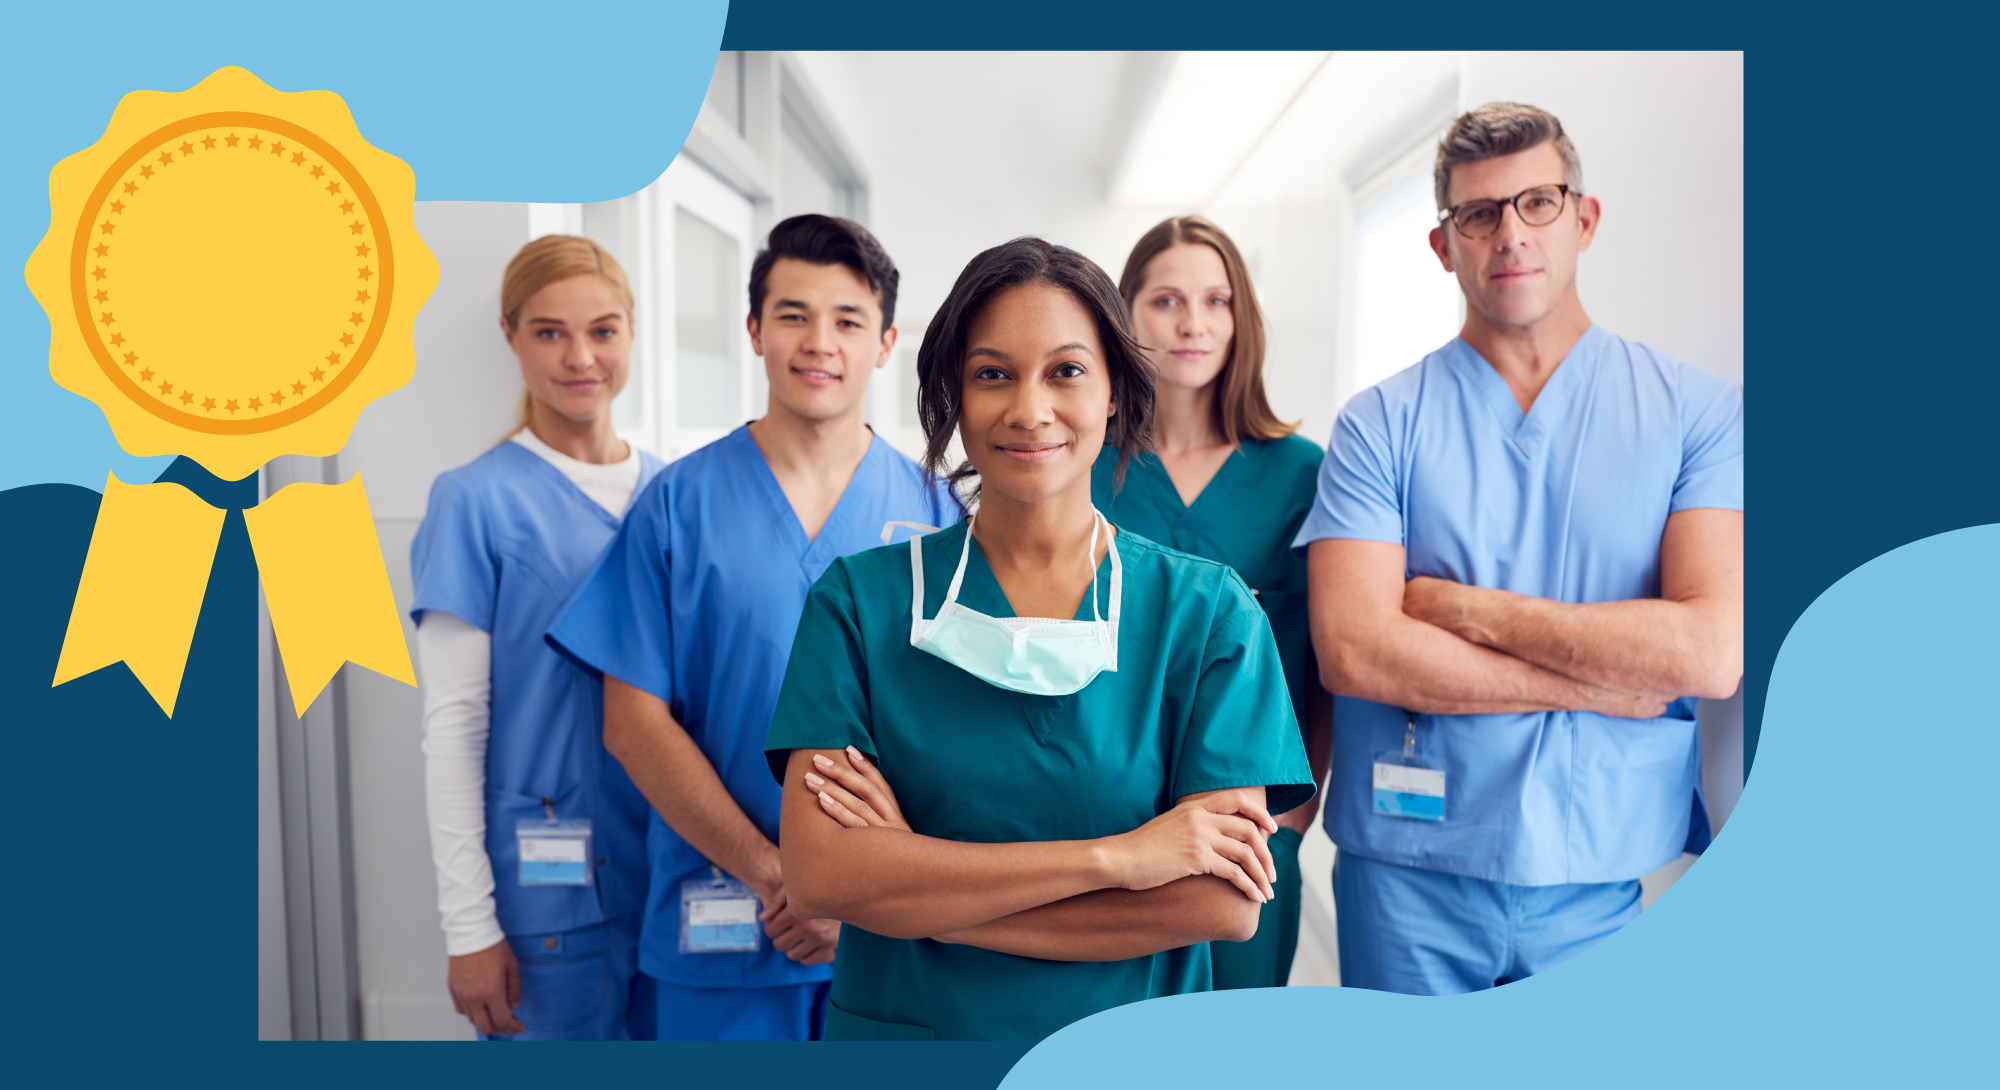 Group of healthcare workers looking at camera with illustrated border